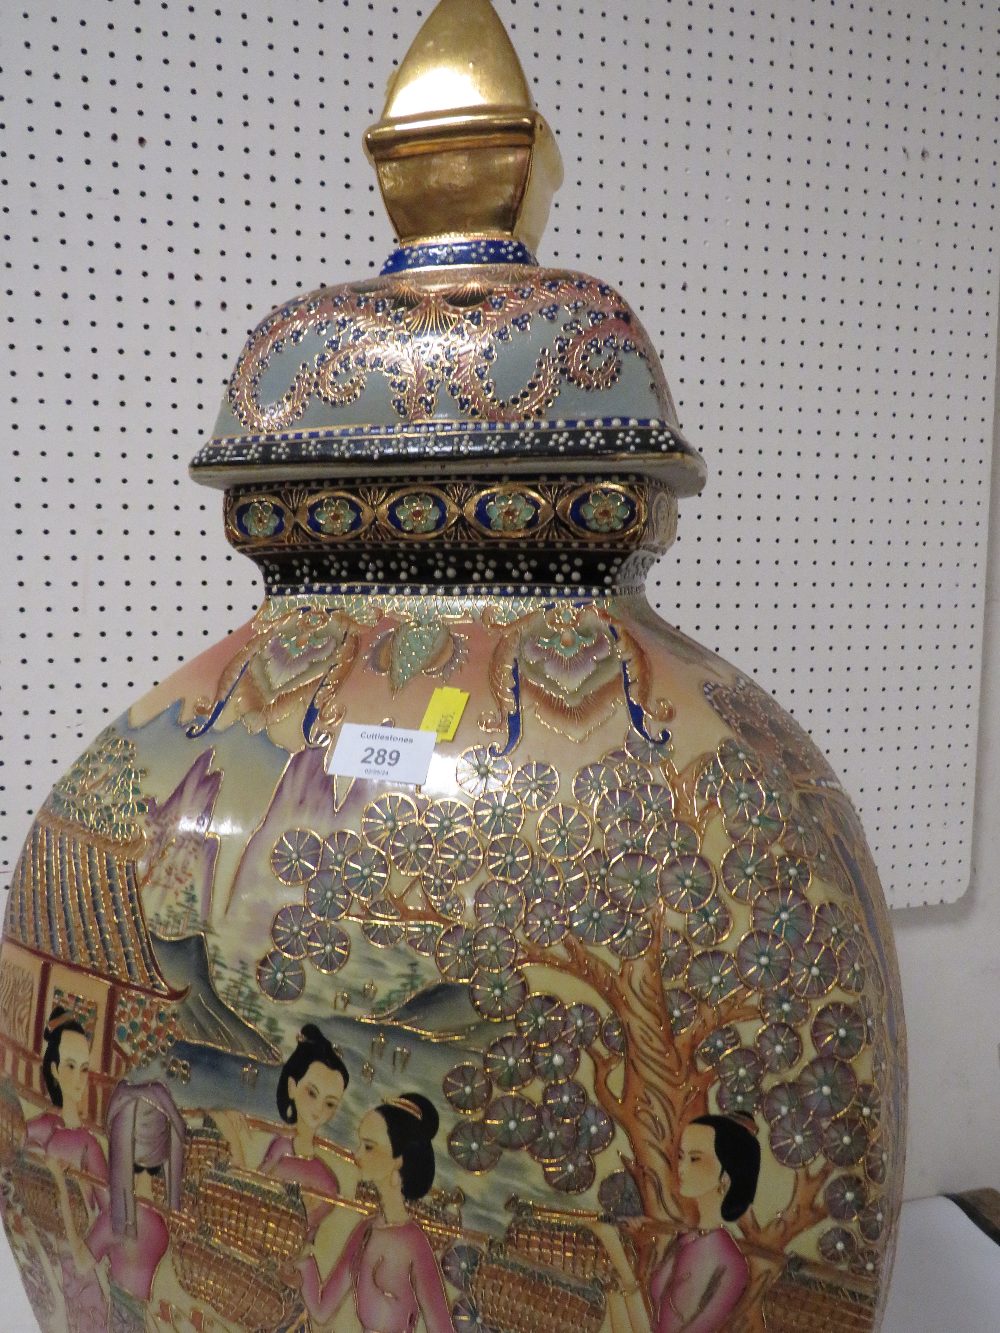 A LARGE DECORATIVE ORIENTAL VASE TOGETHER WITH A PAIR OF BINOCULARS - Image 3 of 8